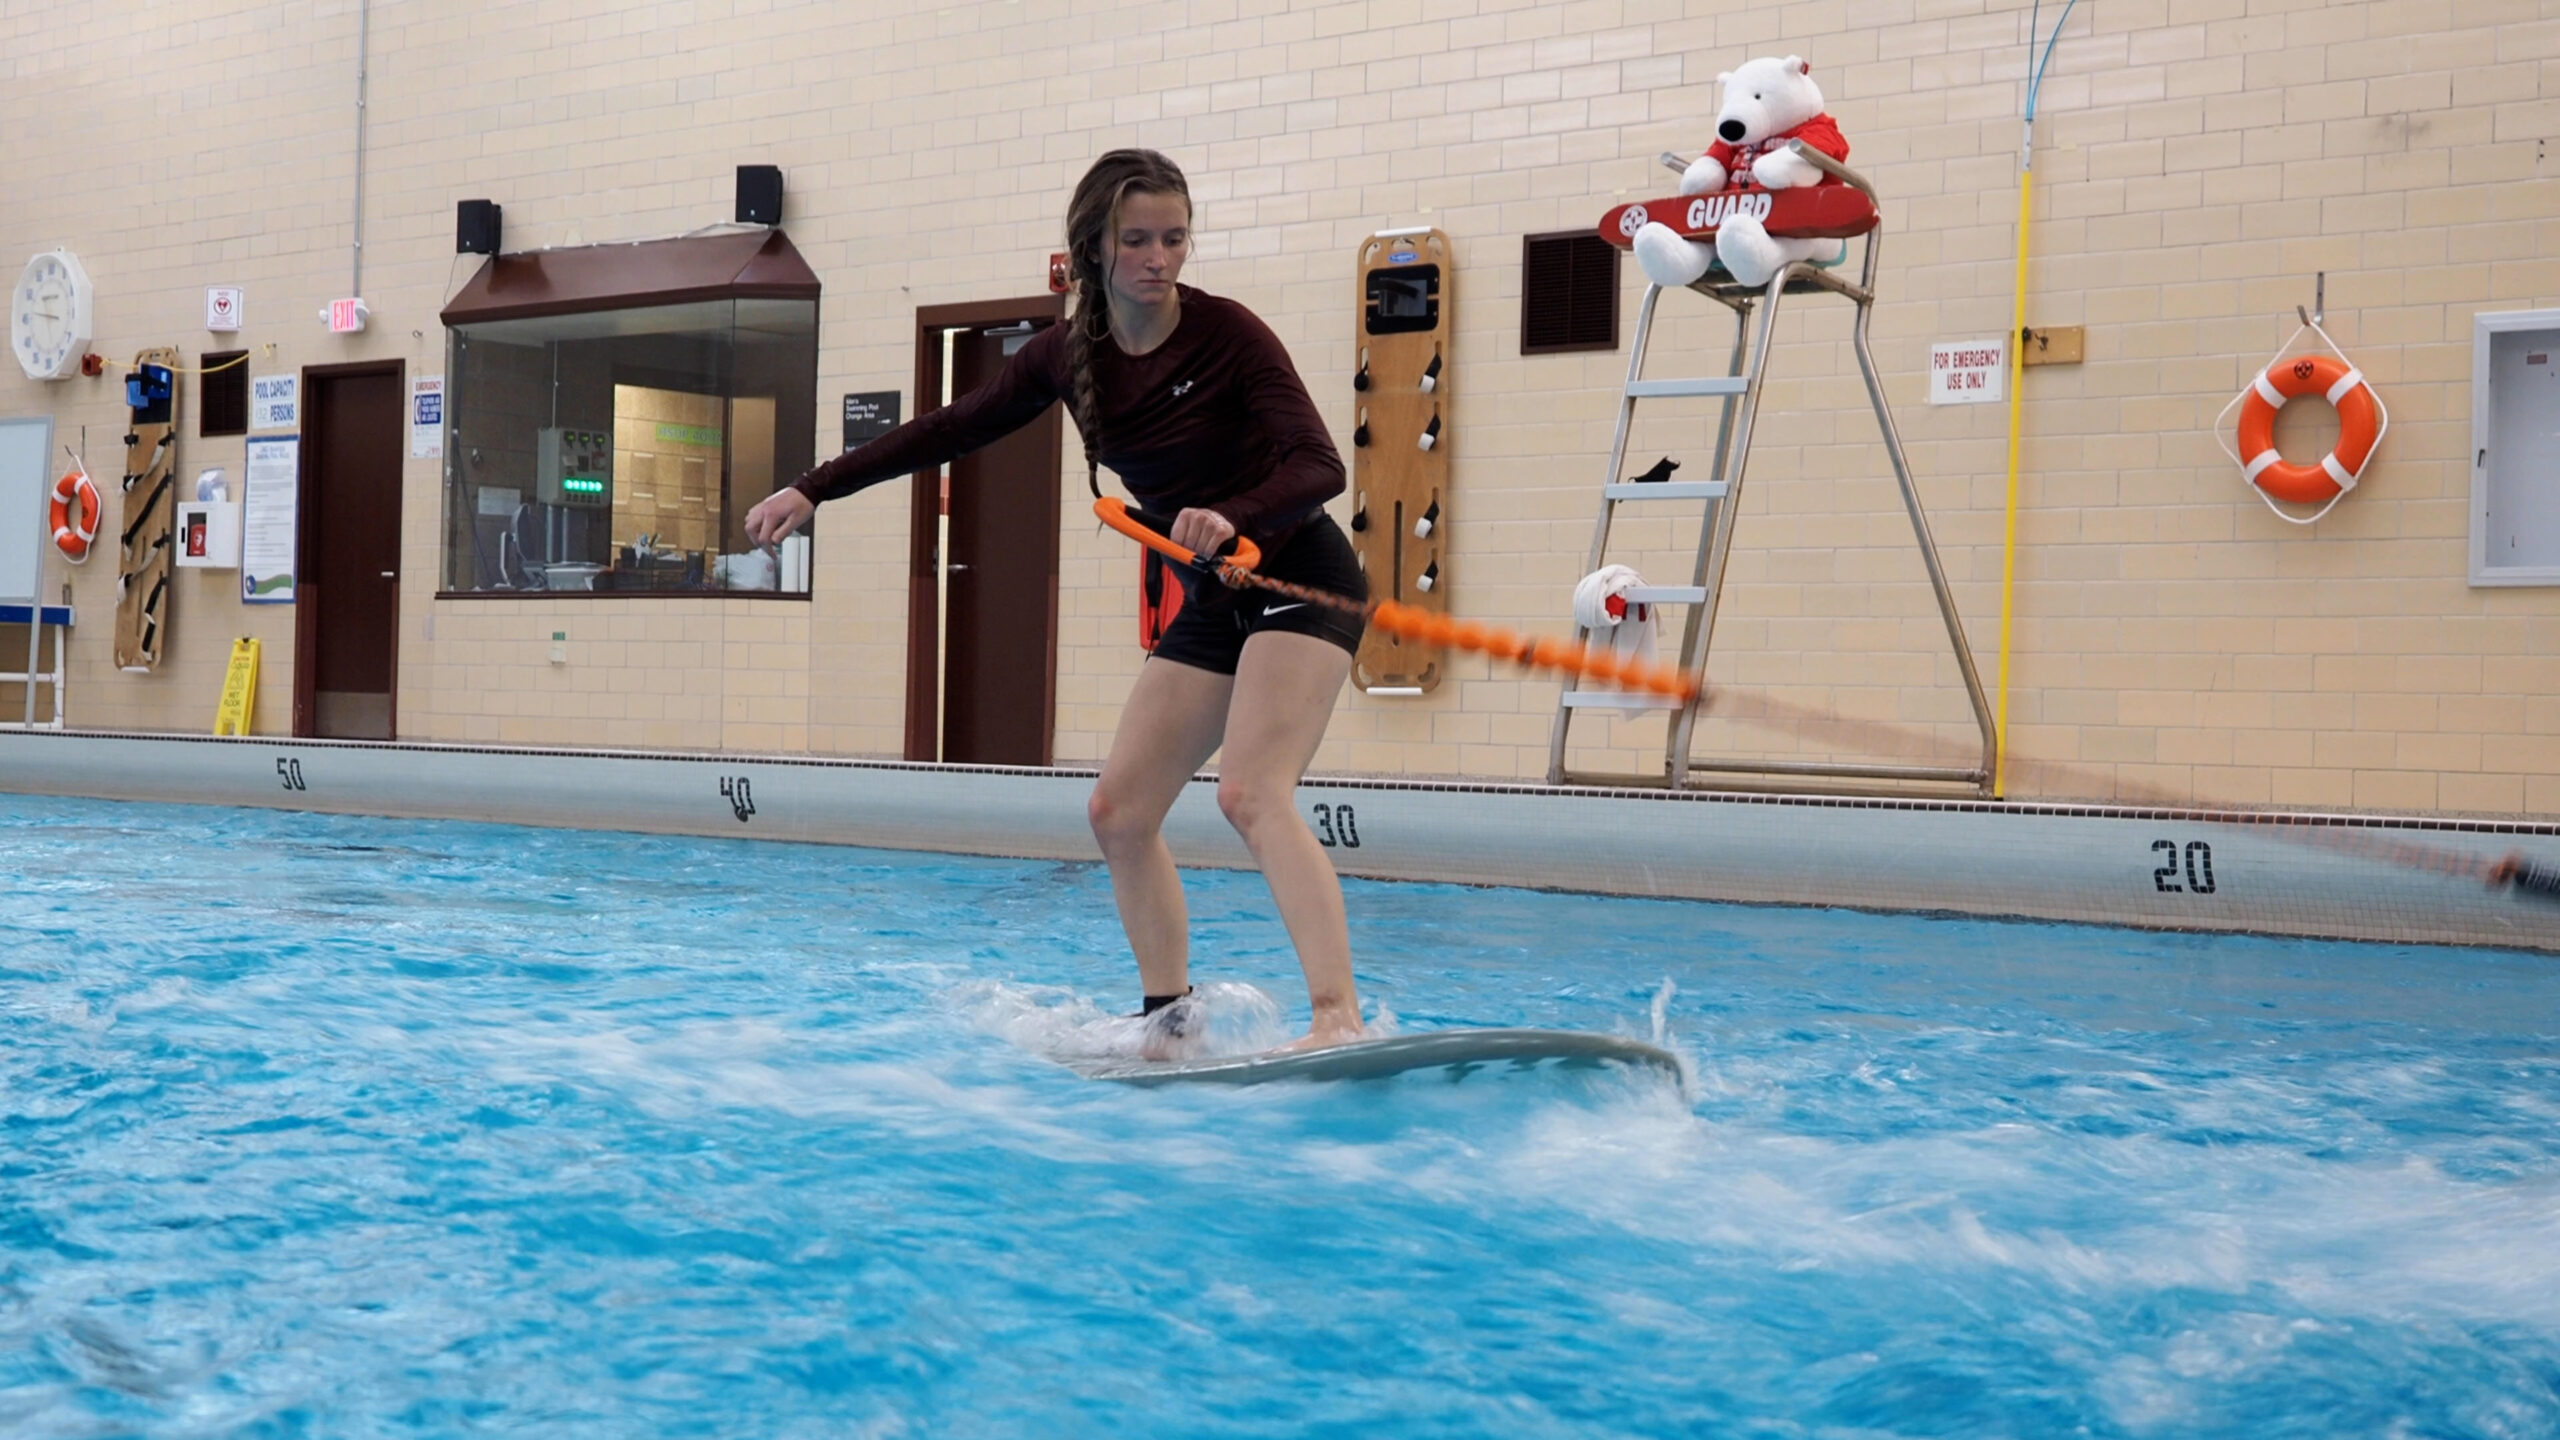 A person stands on a surf board and balances on simulated waves in a swimming pool. They are holding a cable with one hand as they balance their body.